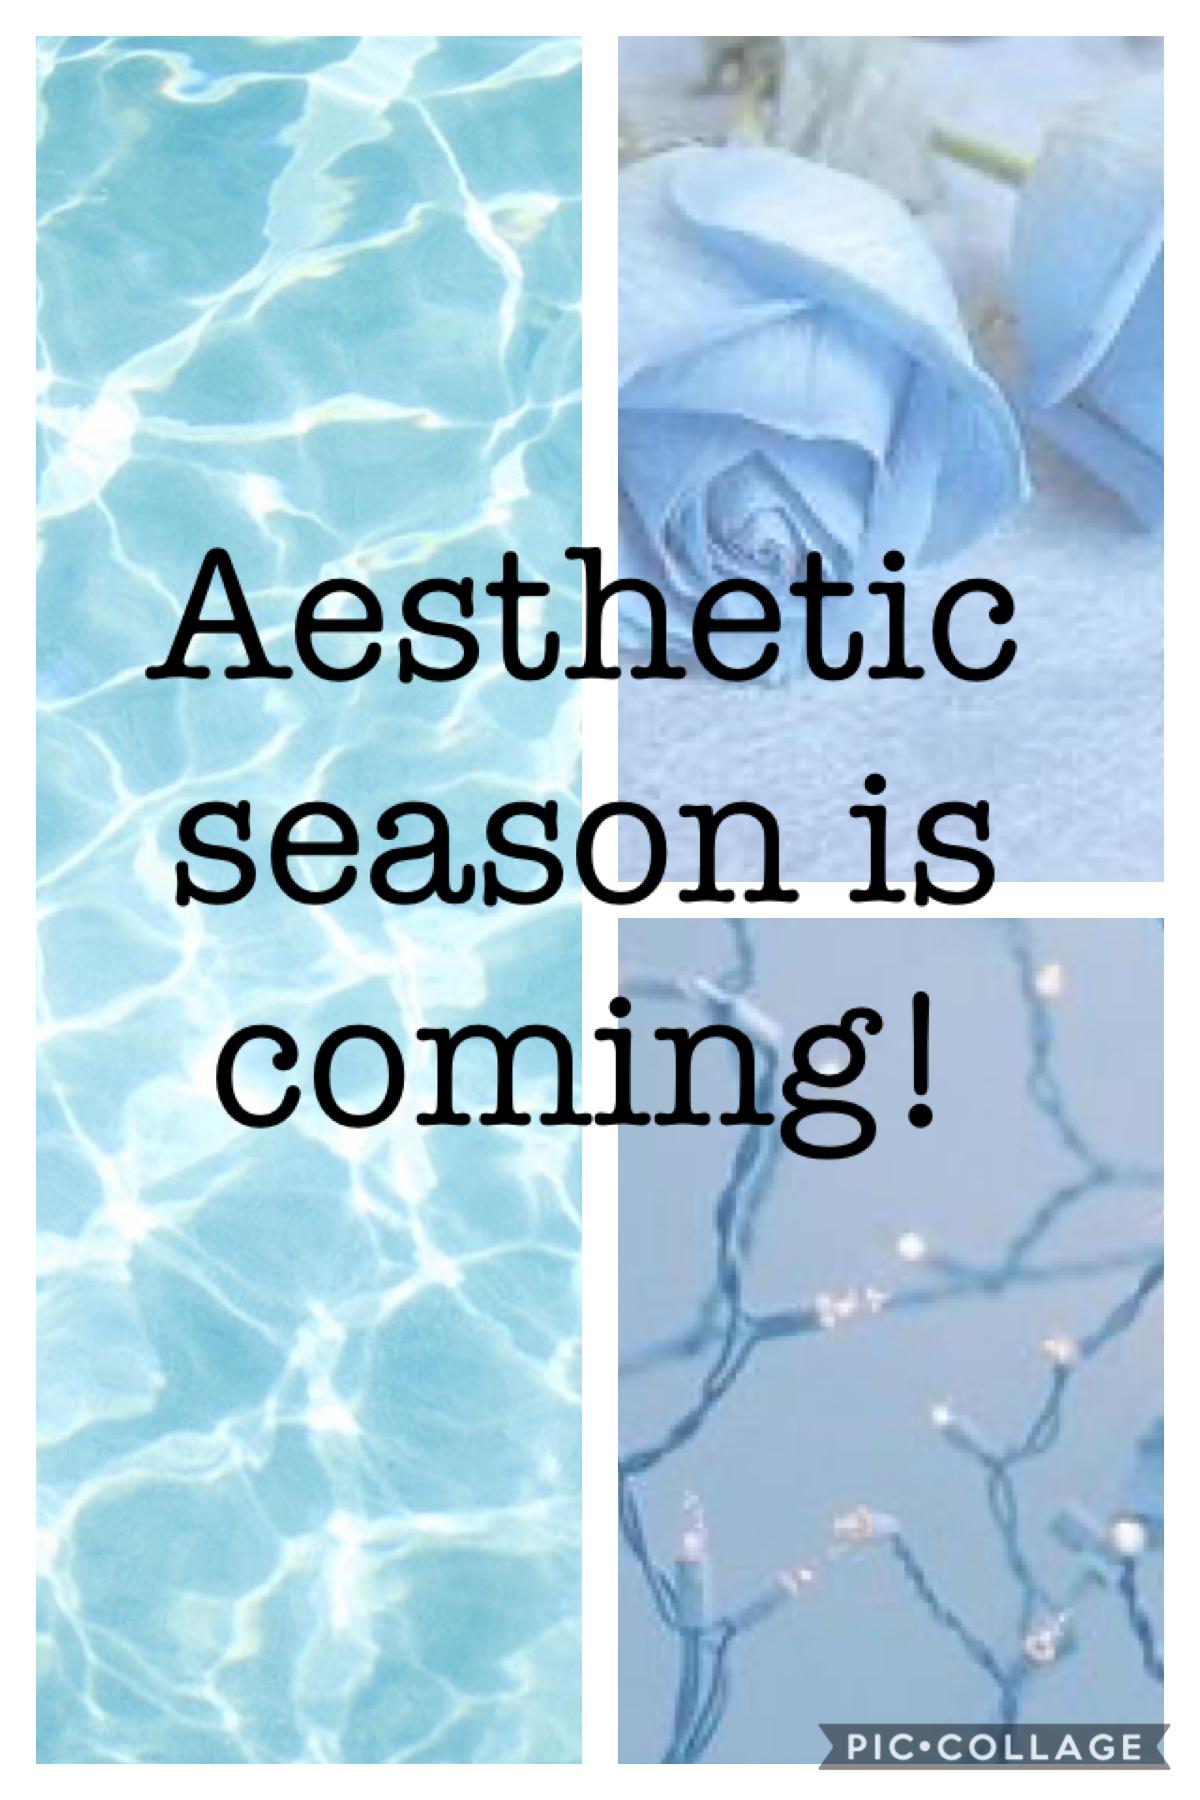 Aesthetic season is coming! Get the Christmas lights on and ready for action! 
 
Follow me! I will post aesthetic collages and you can keep up on when I post a new collage! 

Follow these steps! 

- Like one of my collages

- comment on one of my collages